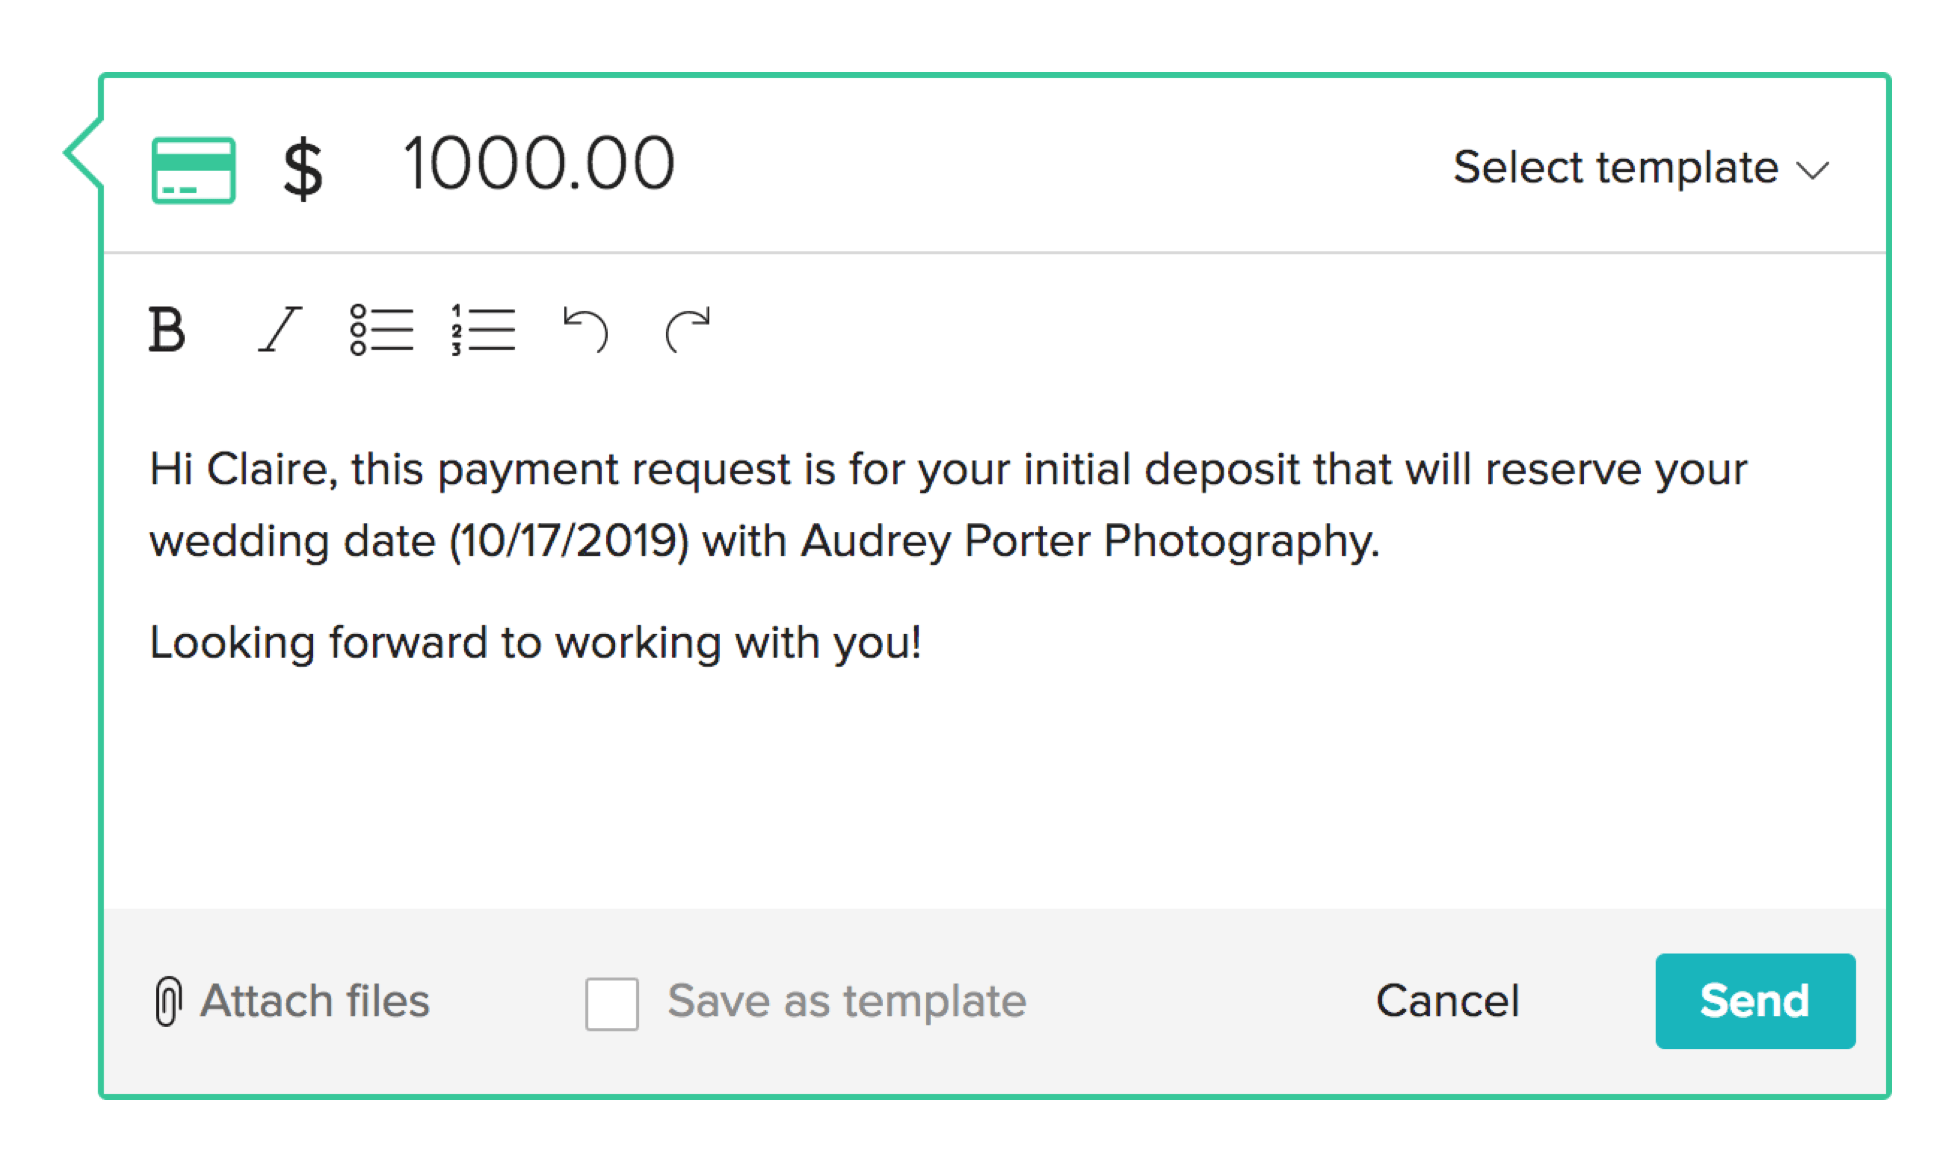 Enter payment amount and send request.